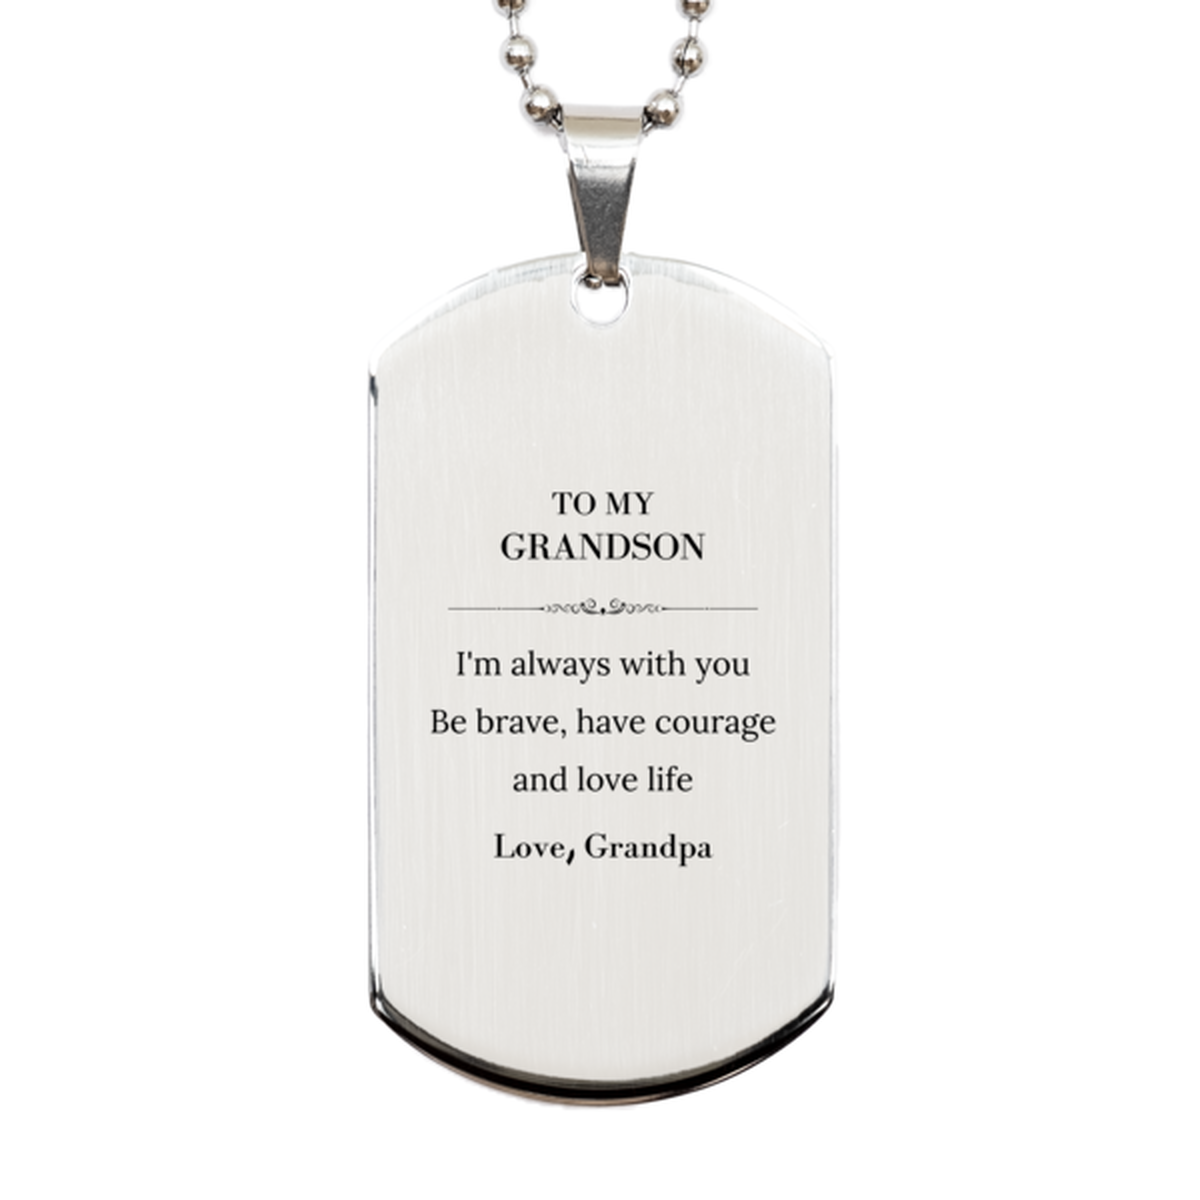 To My Grandson Gifts from Grandpa, Unique Silver Dog Tag Inspirational Christmas Birthday Graduation Gifts for Grandson I'm always with you. Be brave, have courage and love life. Love, Grandpa